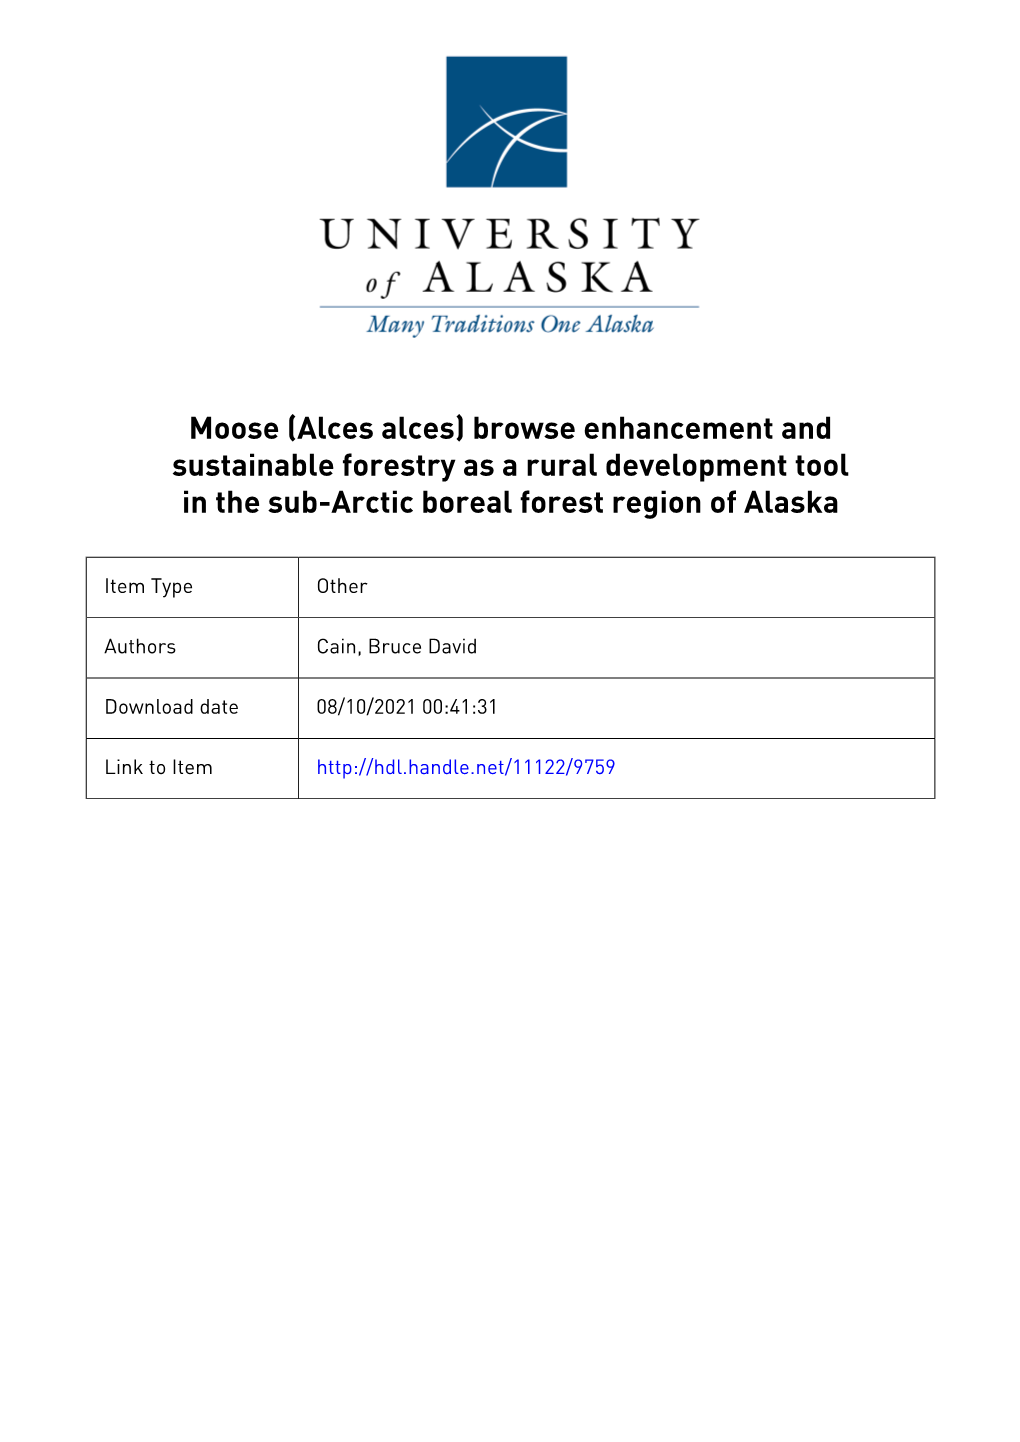 Moose (Alces Alces) Browse Enhancement and Sustainable Forestry As a Rural Development Tool in the Sub-Arctic Boreal Forest Region of Alaska